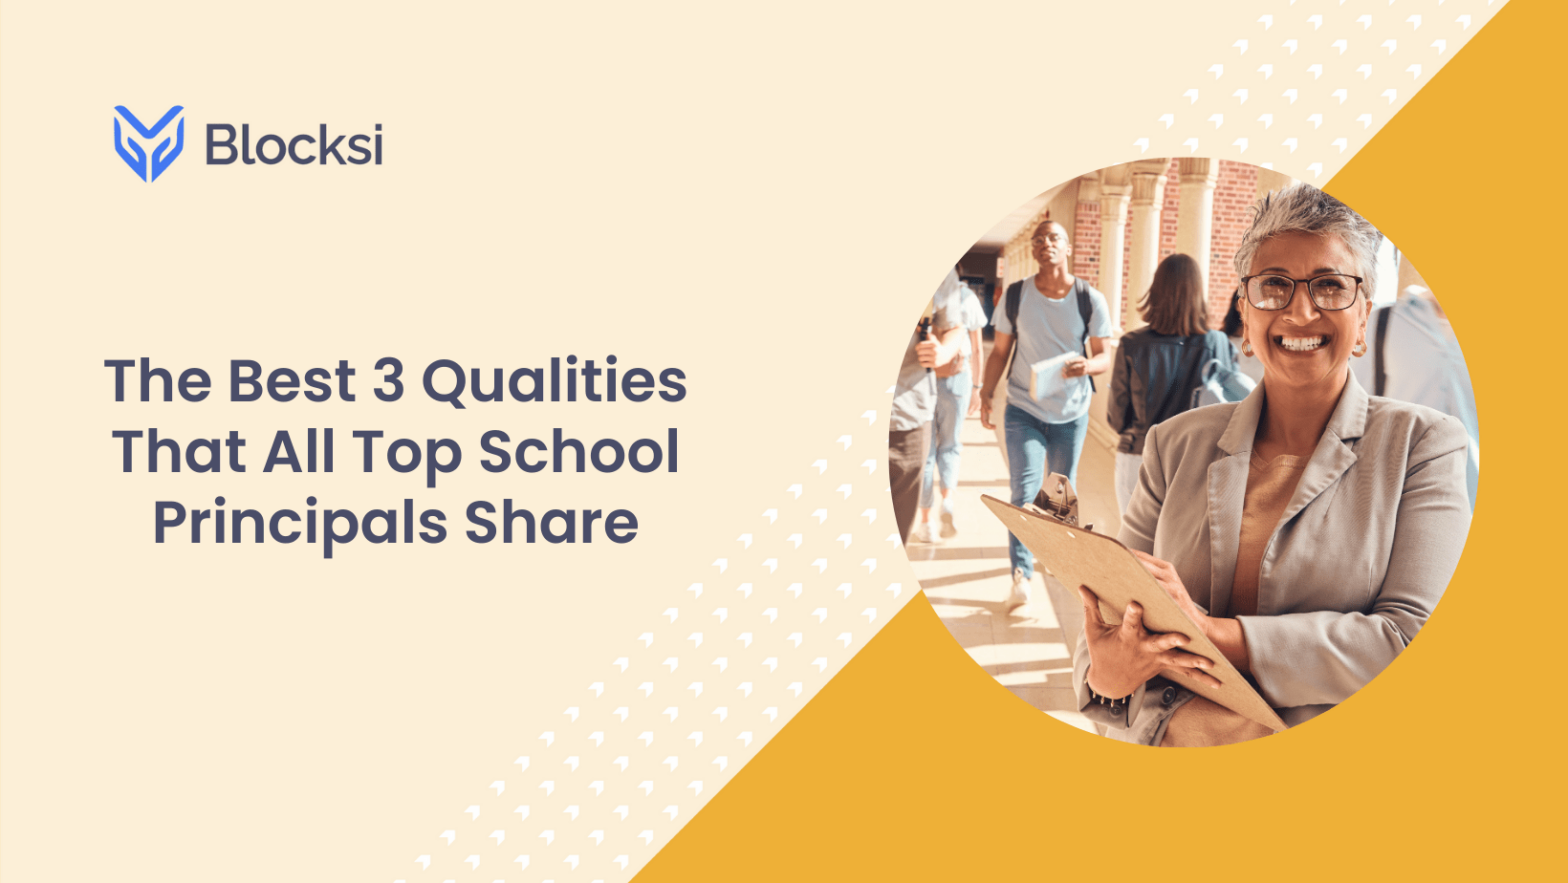 The Best 3 Qualities That All Top School Principals Share